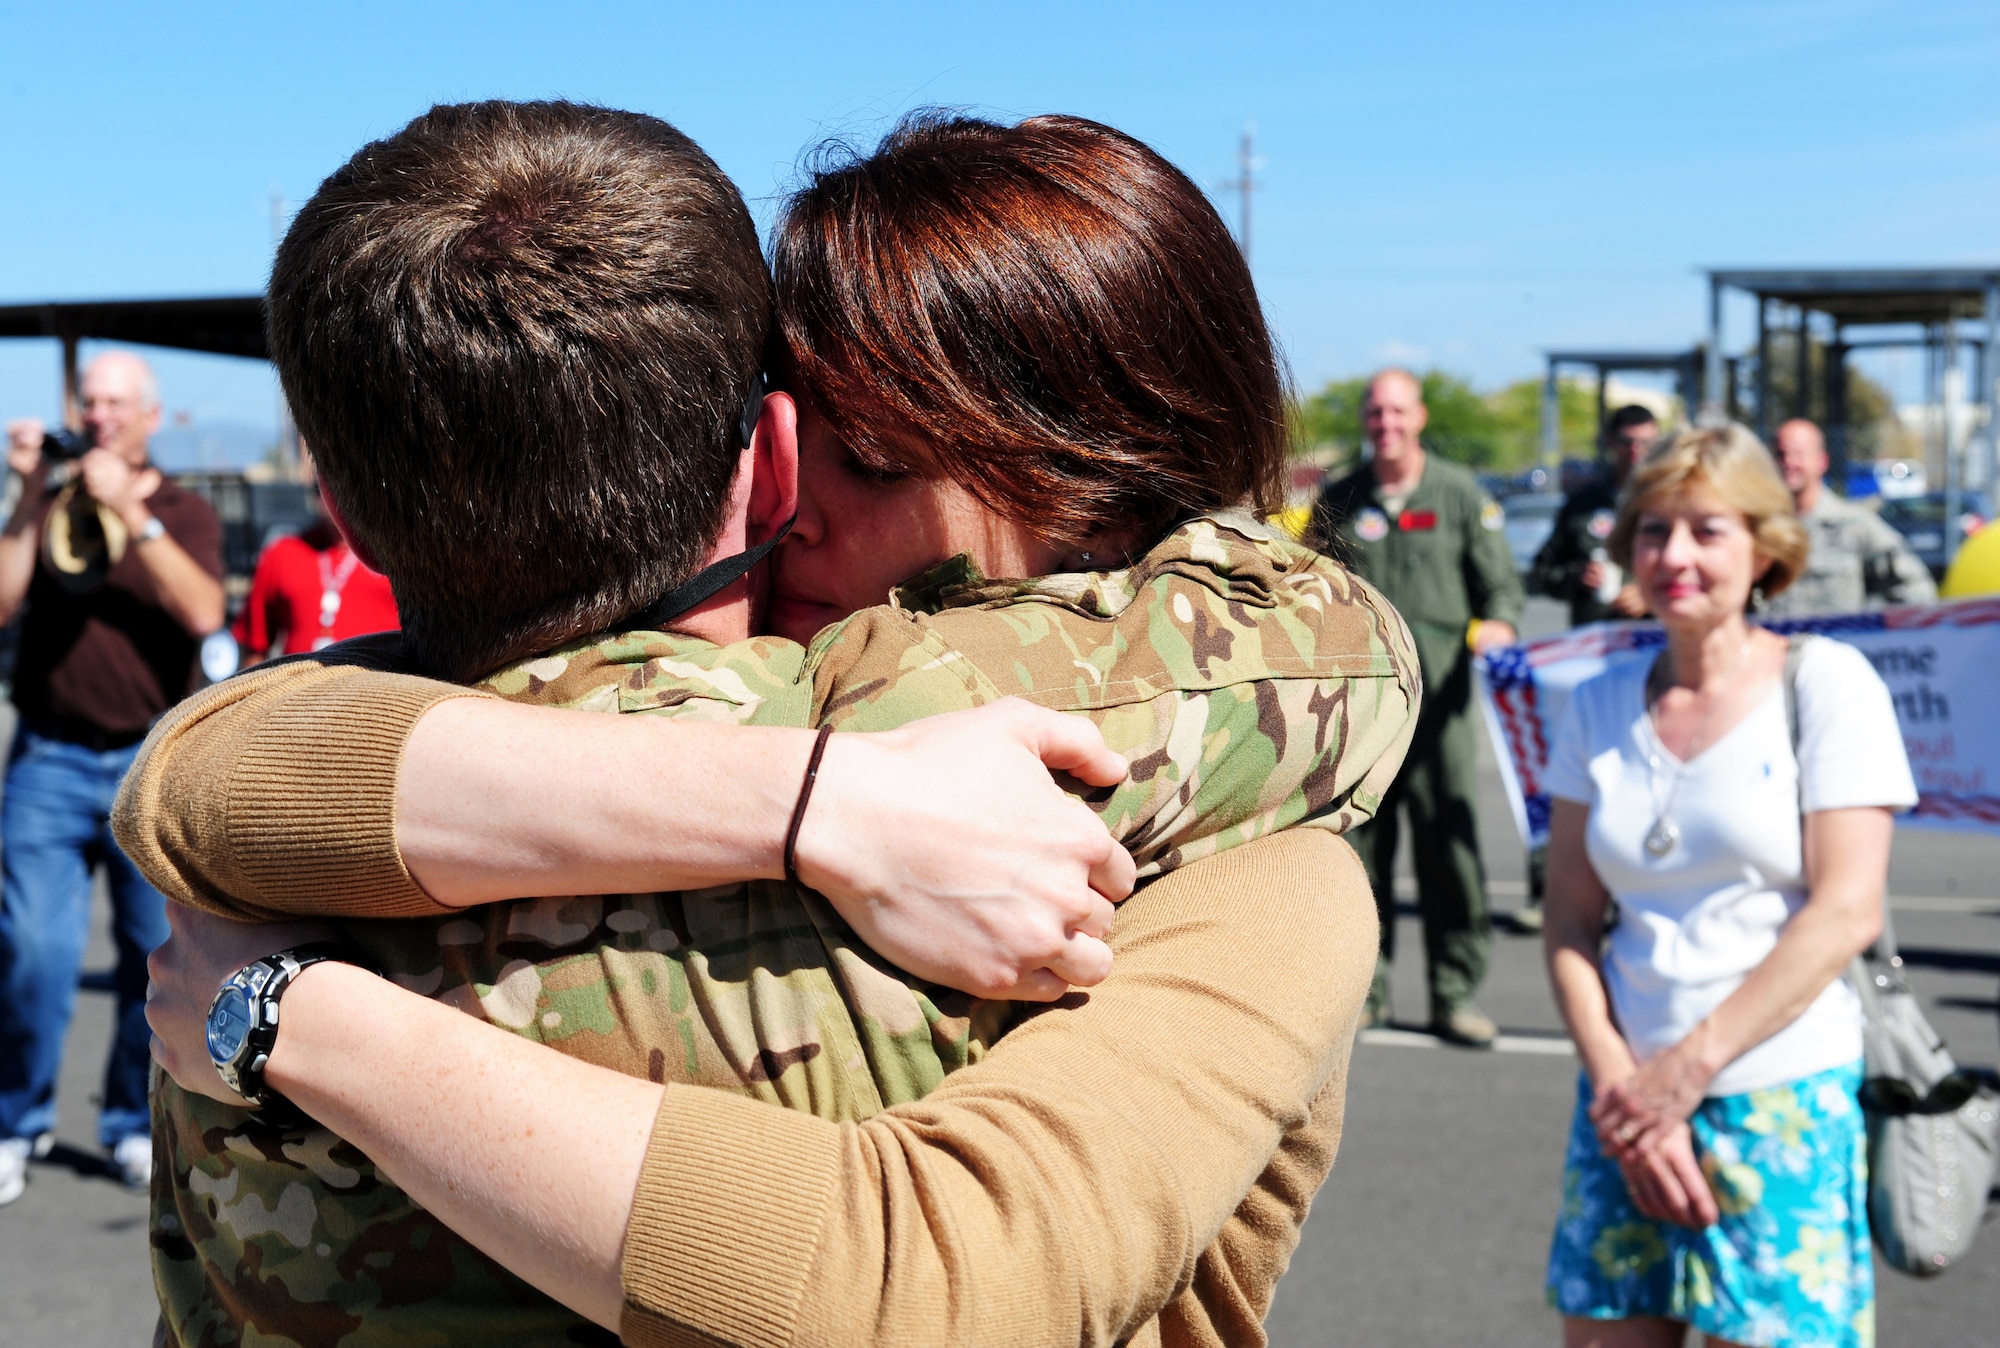 A recently returned MC-12W pilot is embraced by a loved one on the flightline at Beale Air Force Base, Calif., Oct. 1, 2013. MC-12W aircrews surpassed 300,000 combat hours in September, flying approximately 34 years of sorties in only four. (U.S. Air Force photo by Airman 1st Class Bobby Cummings/Released)